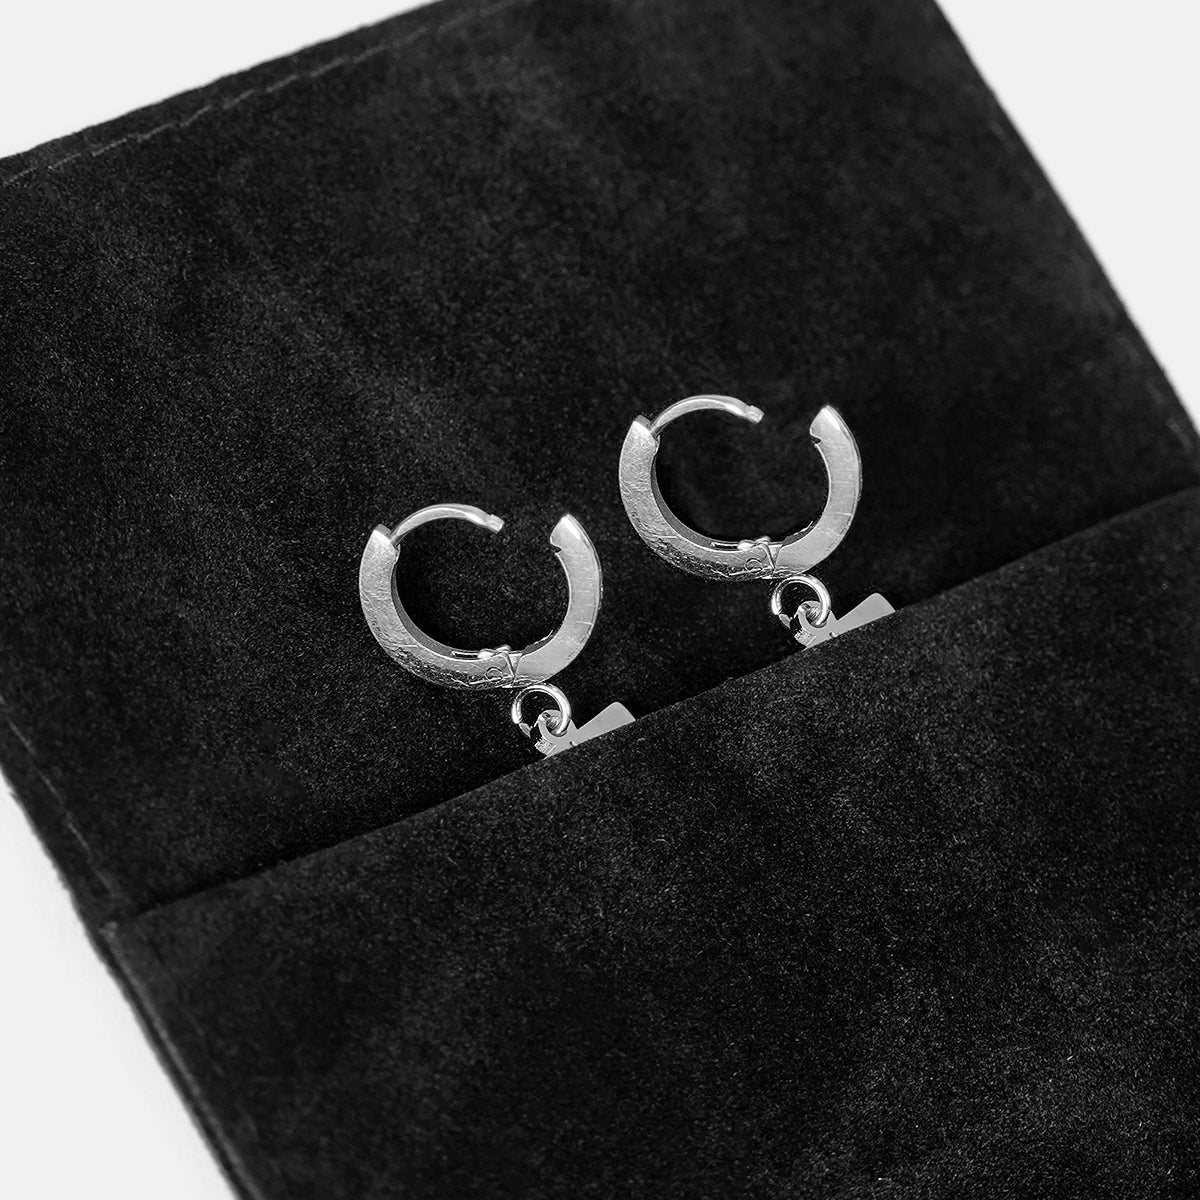 29 Number Earring - Stainless Steel